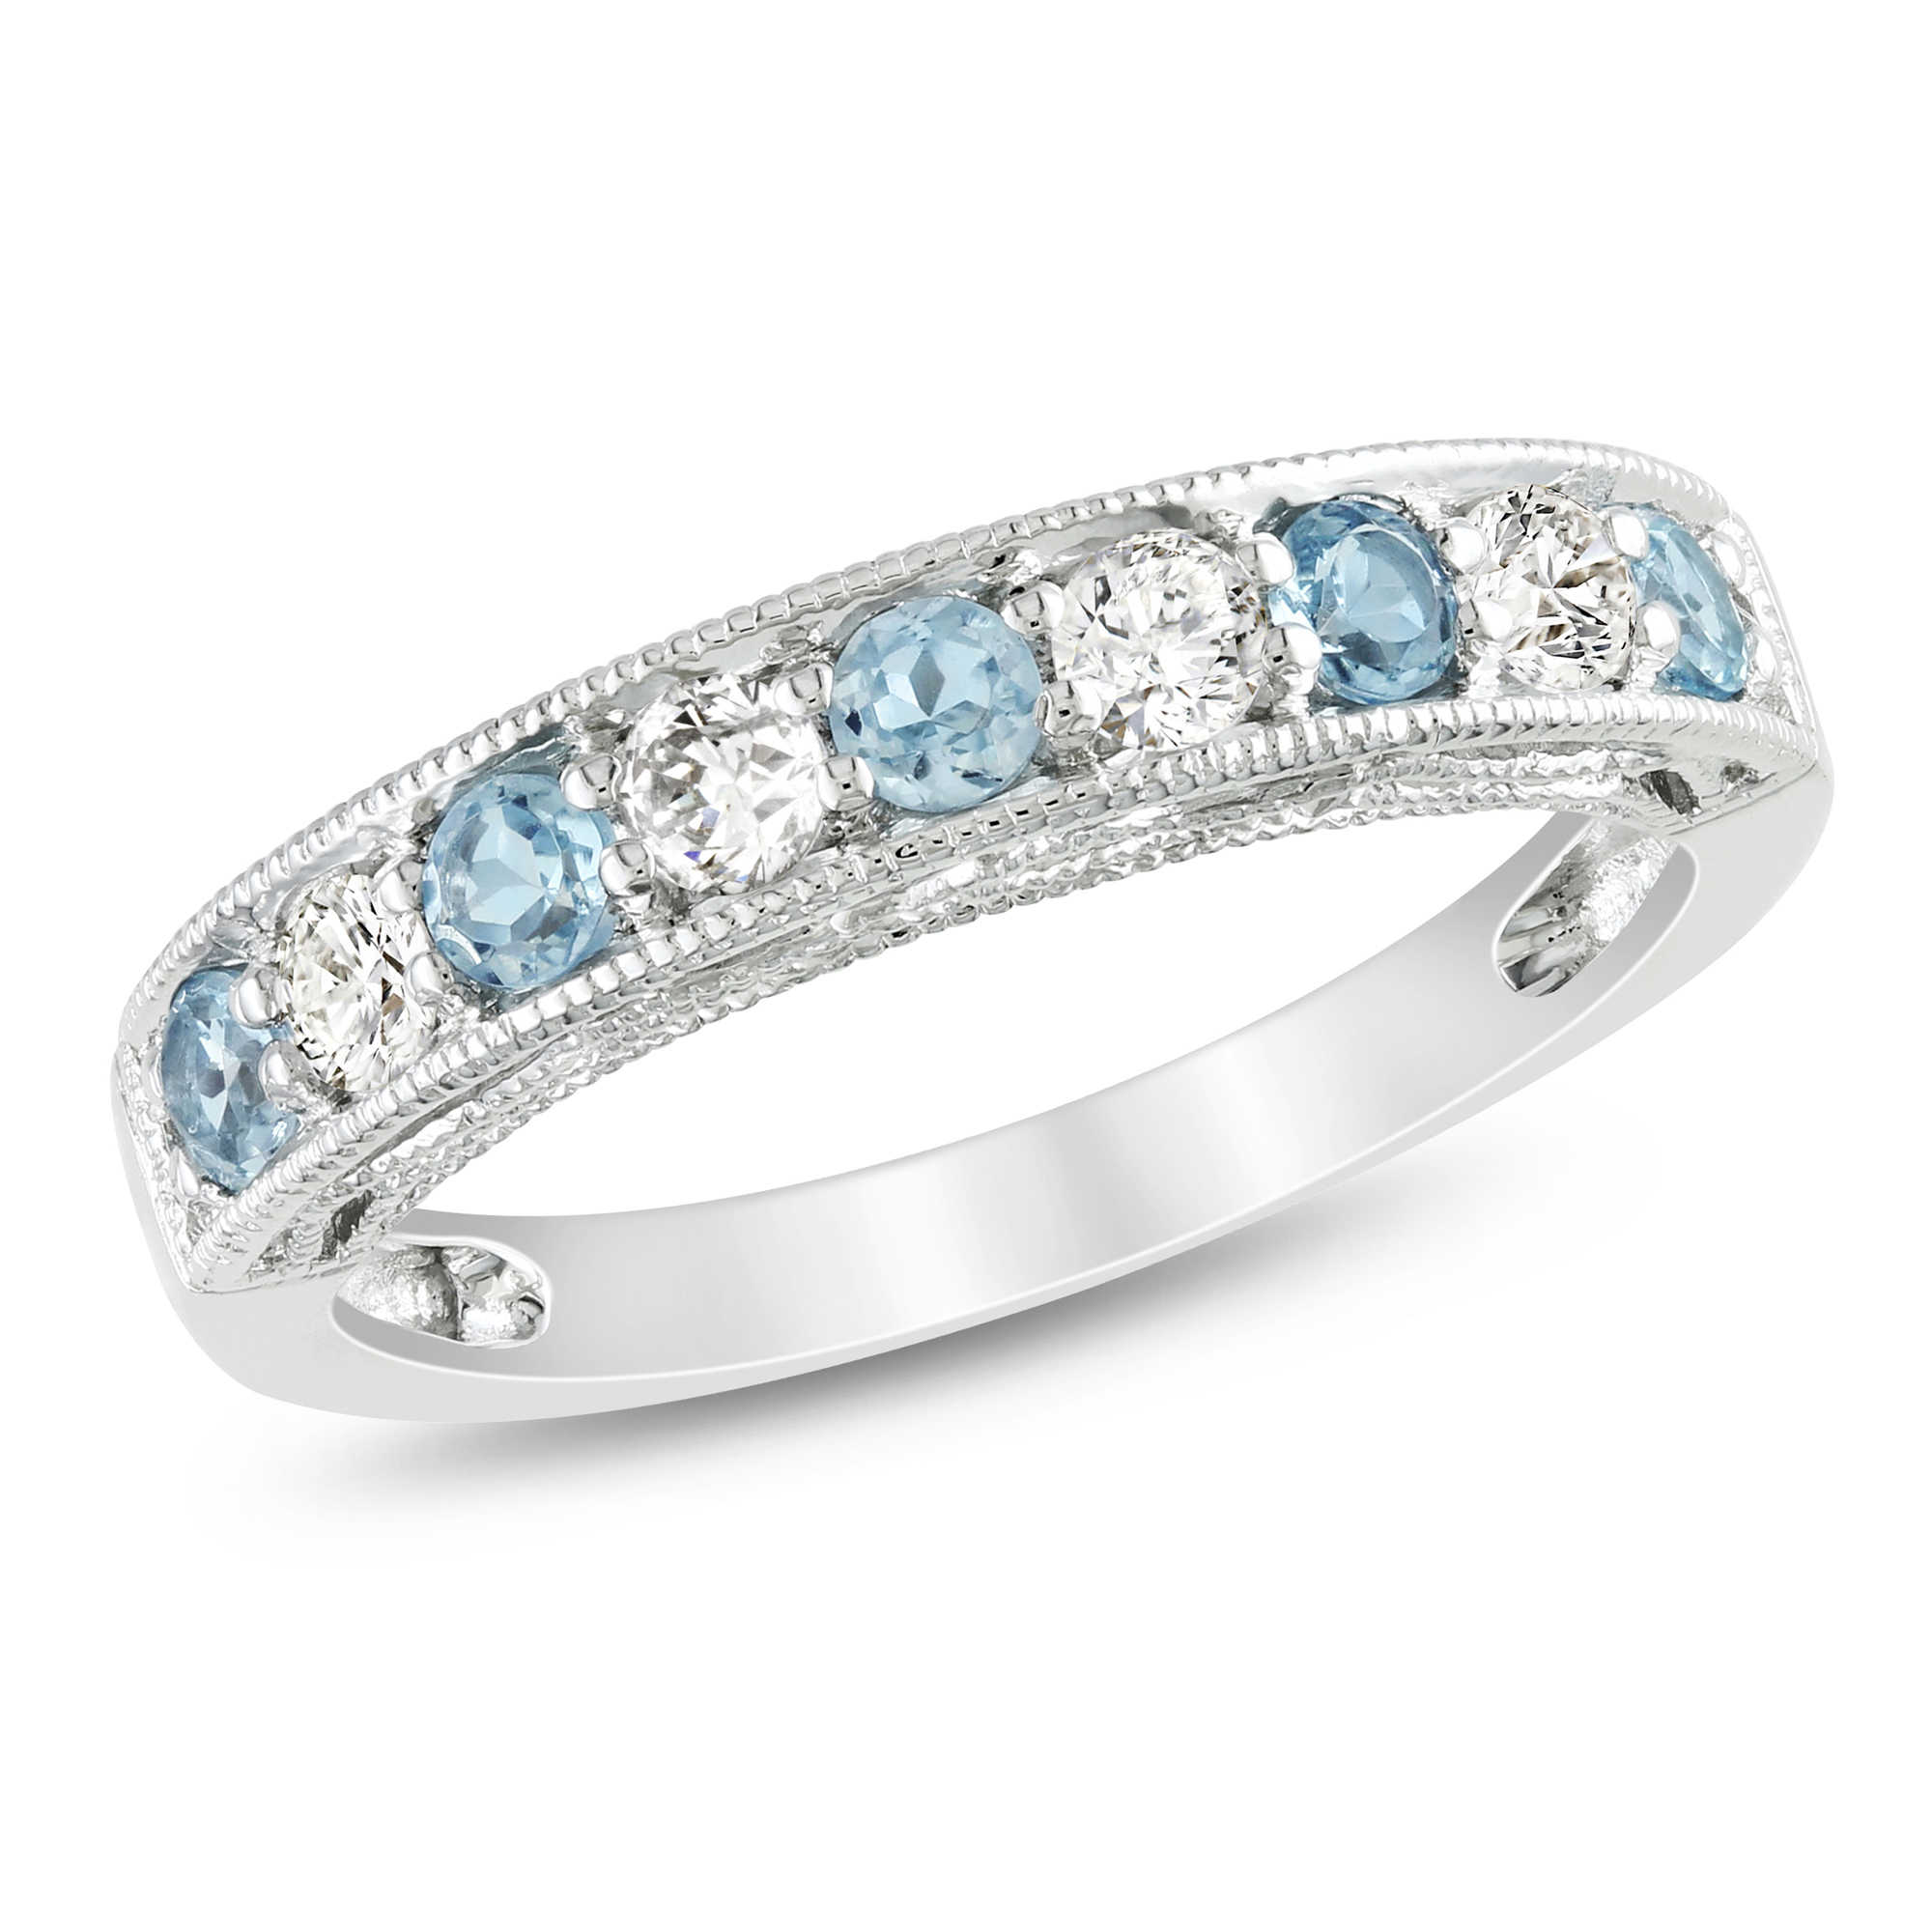 Amour 3/4 Carat T.G.W. Blue Topaz Created White Sapphire Fashion Ring in Sterling Silver